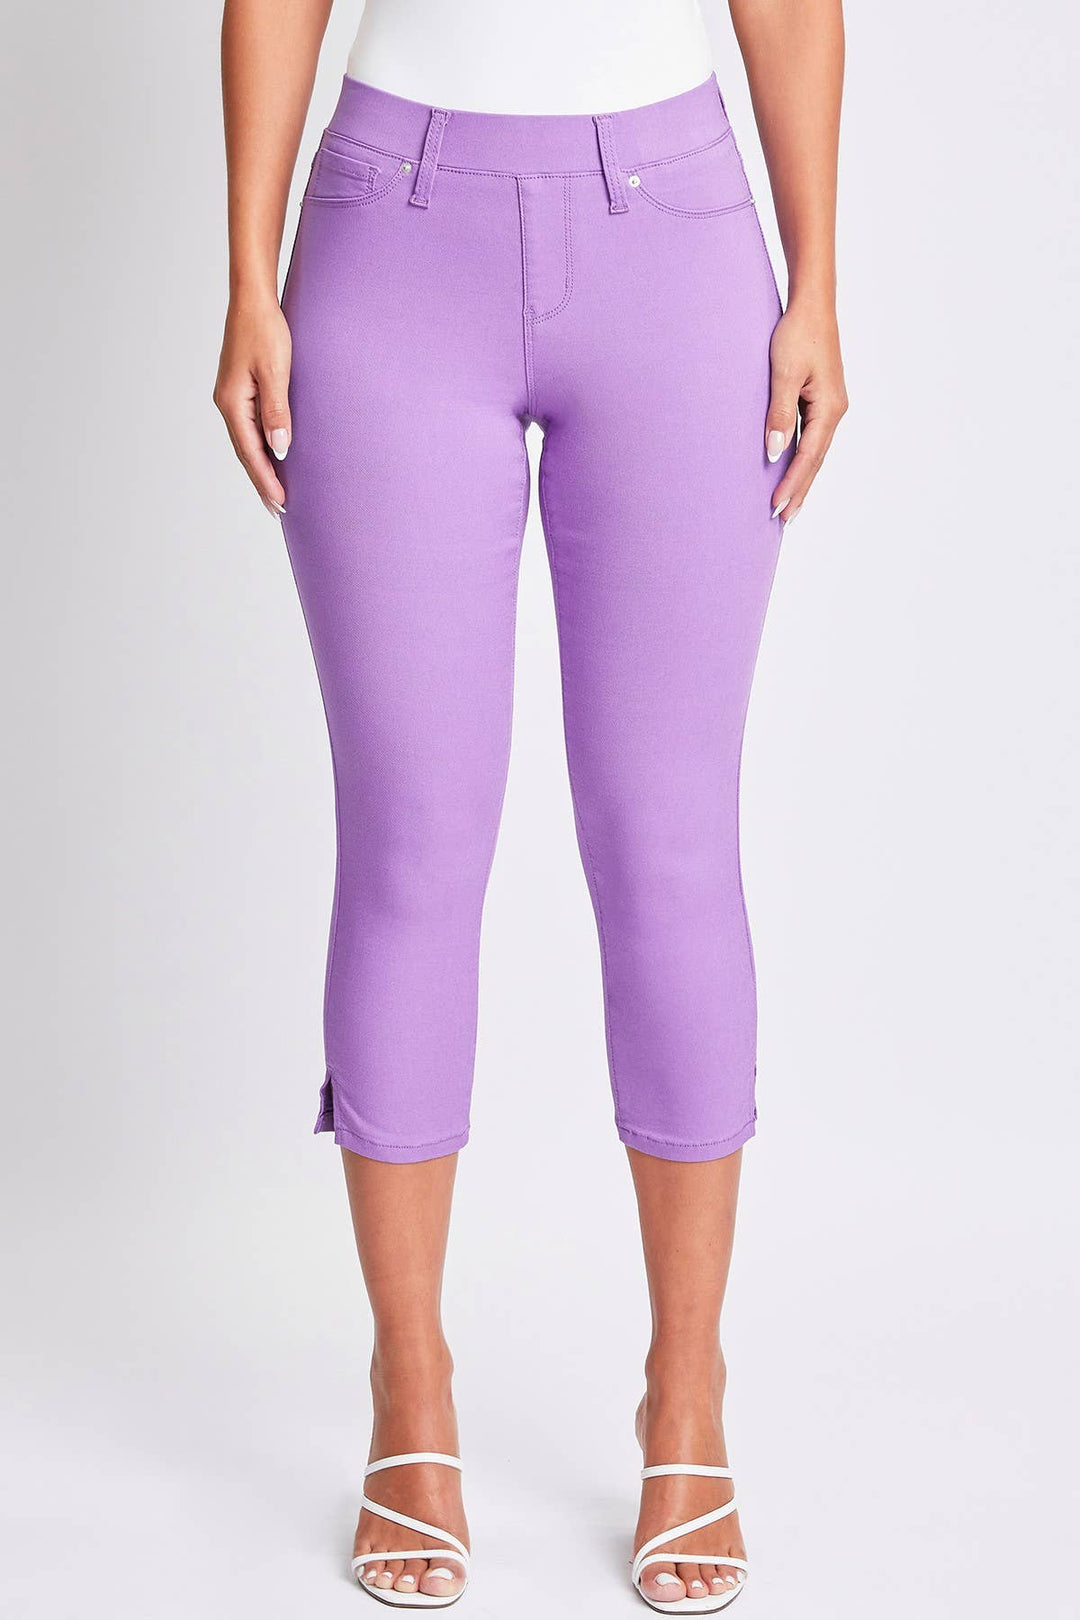 YMI Hyperstretch Pull On Capri Pants, Hydrangea-Pants-Inspired by Justeen-Women's Clothing Boutique in Chicago, Illinois